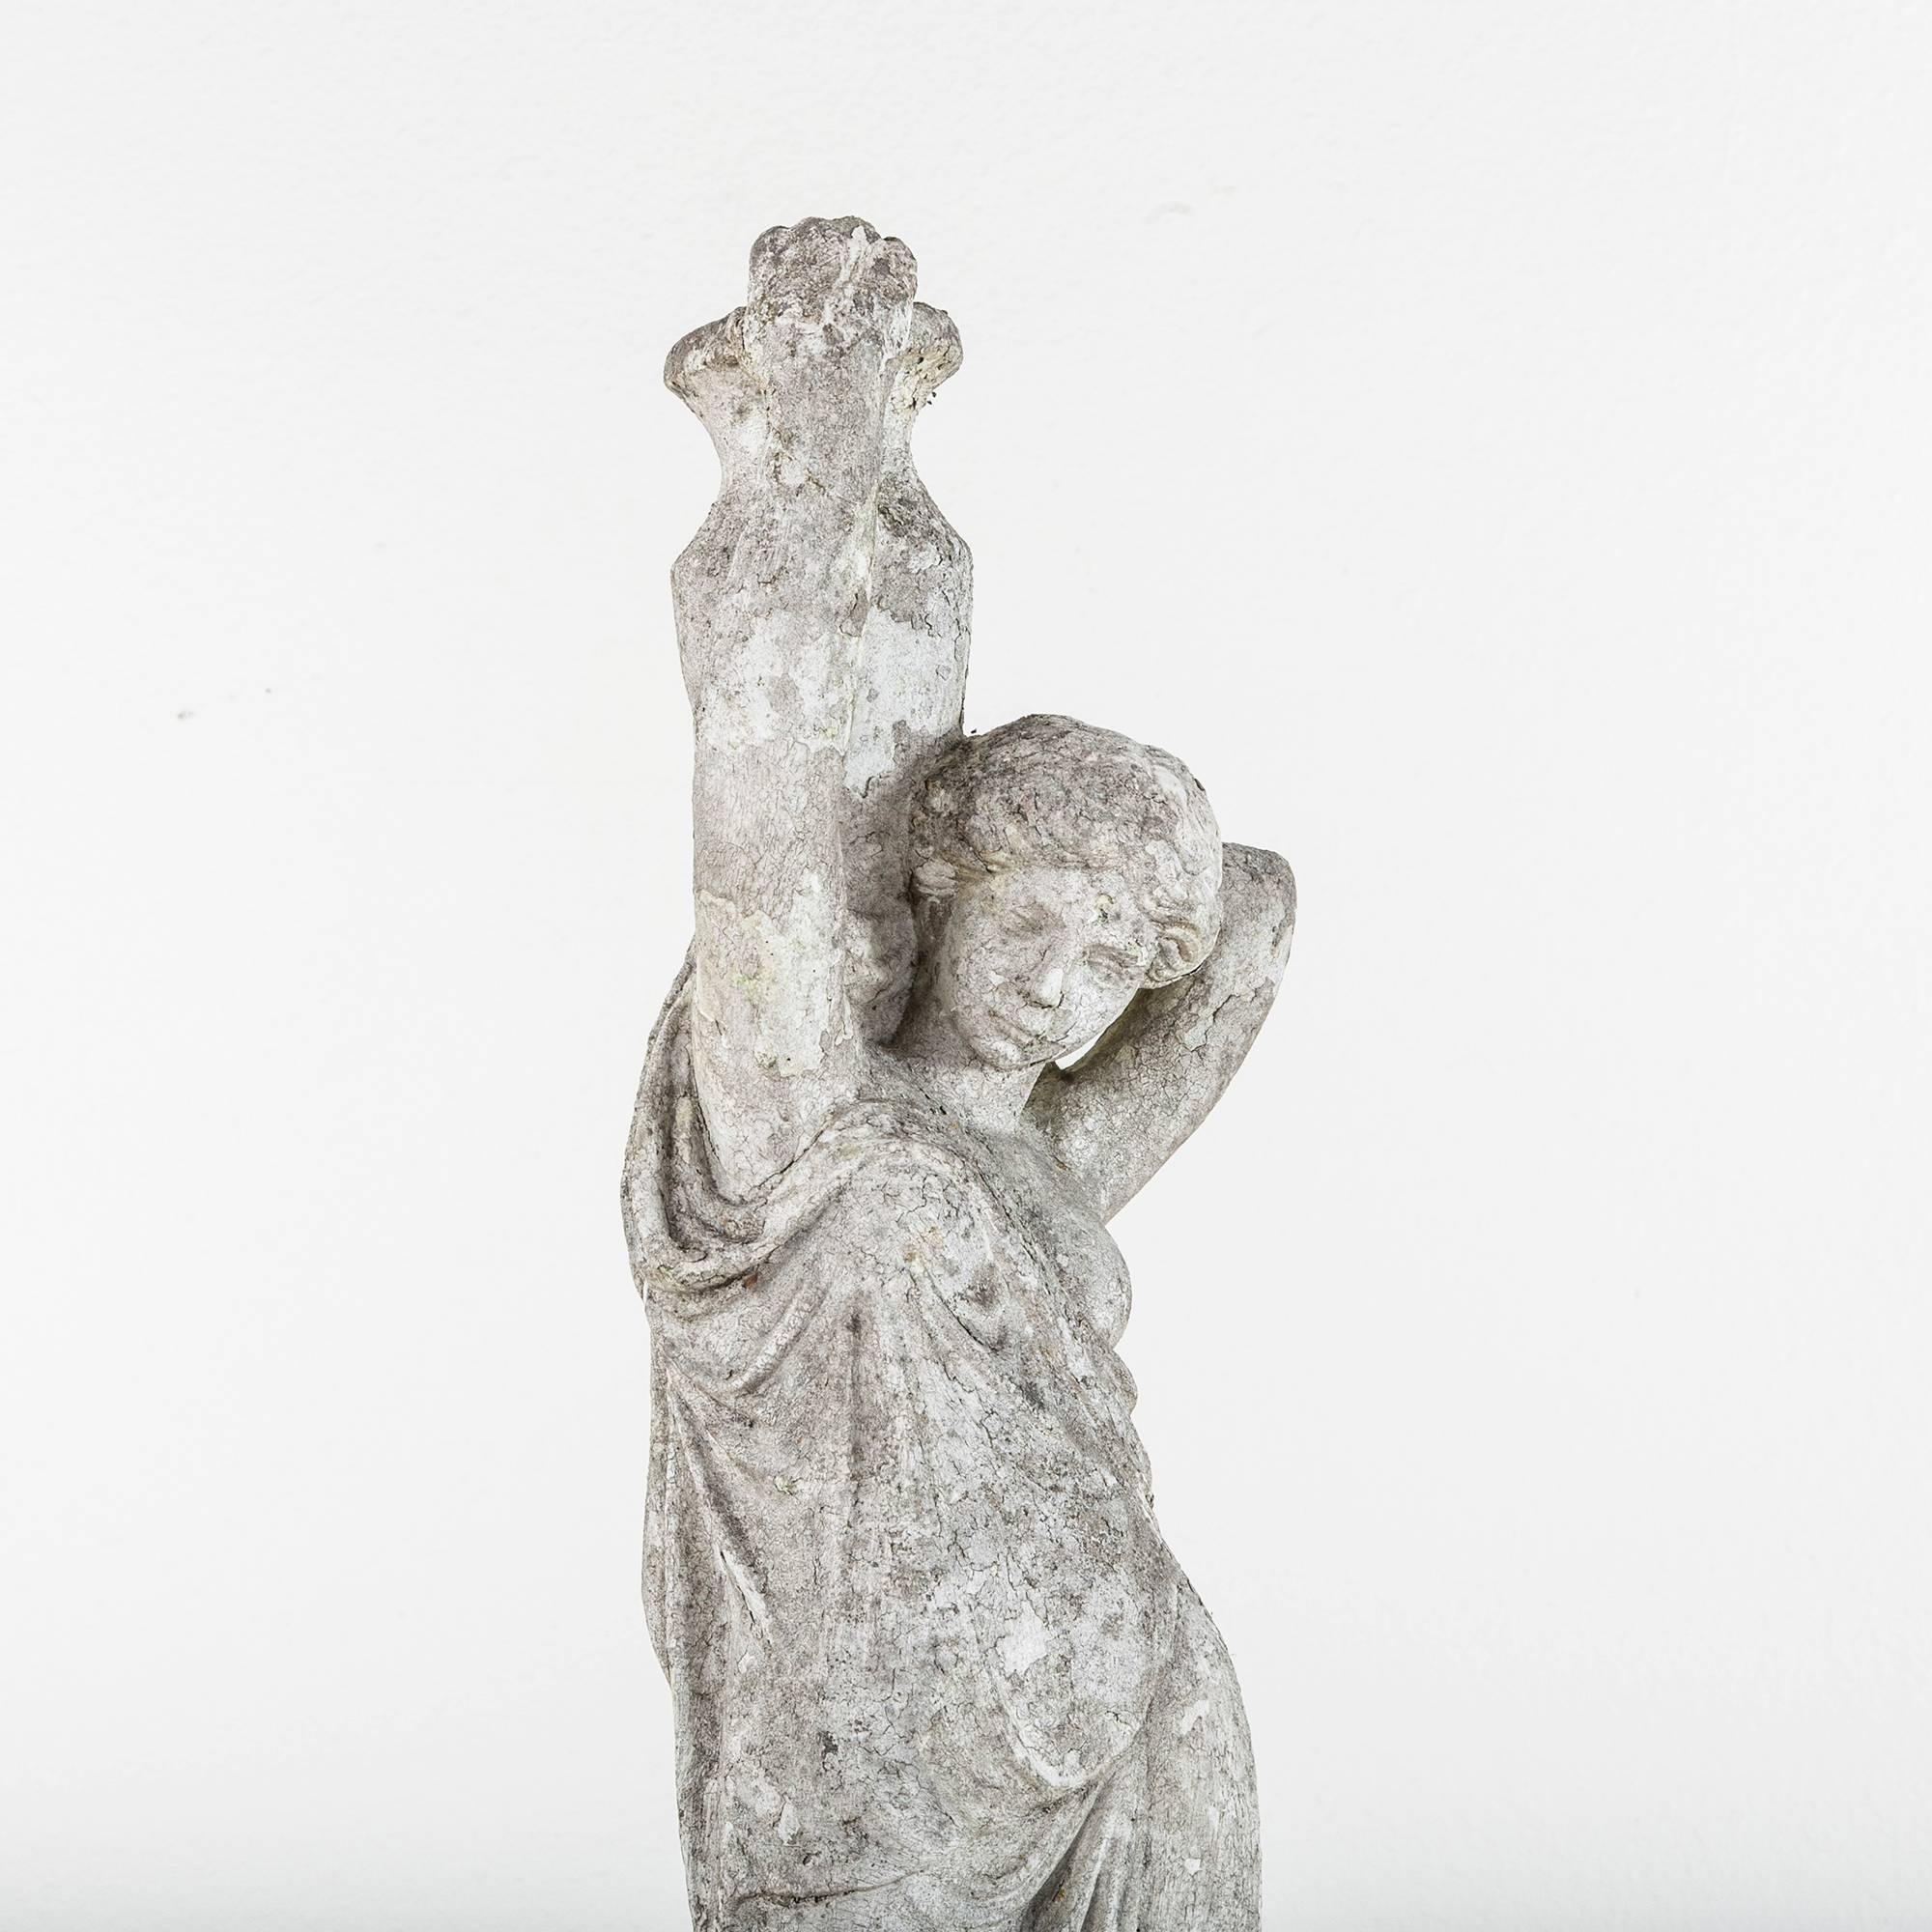 This beautifully aged stone statue reflects the Classical Greek style. The figure of a female stands holding a large urn for water over her shoulder. With the lovely patina only age and weathering can bring, this elegant statue will make a divine